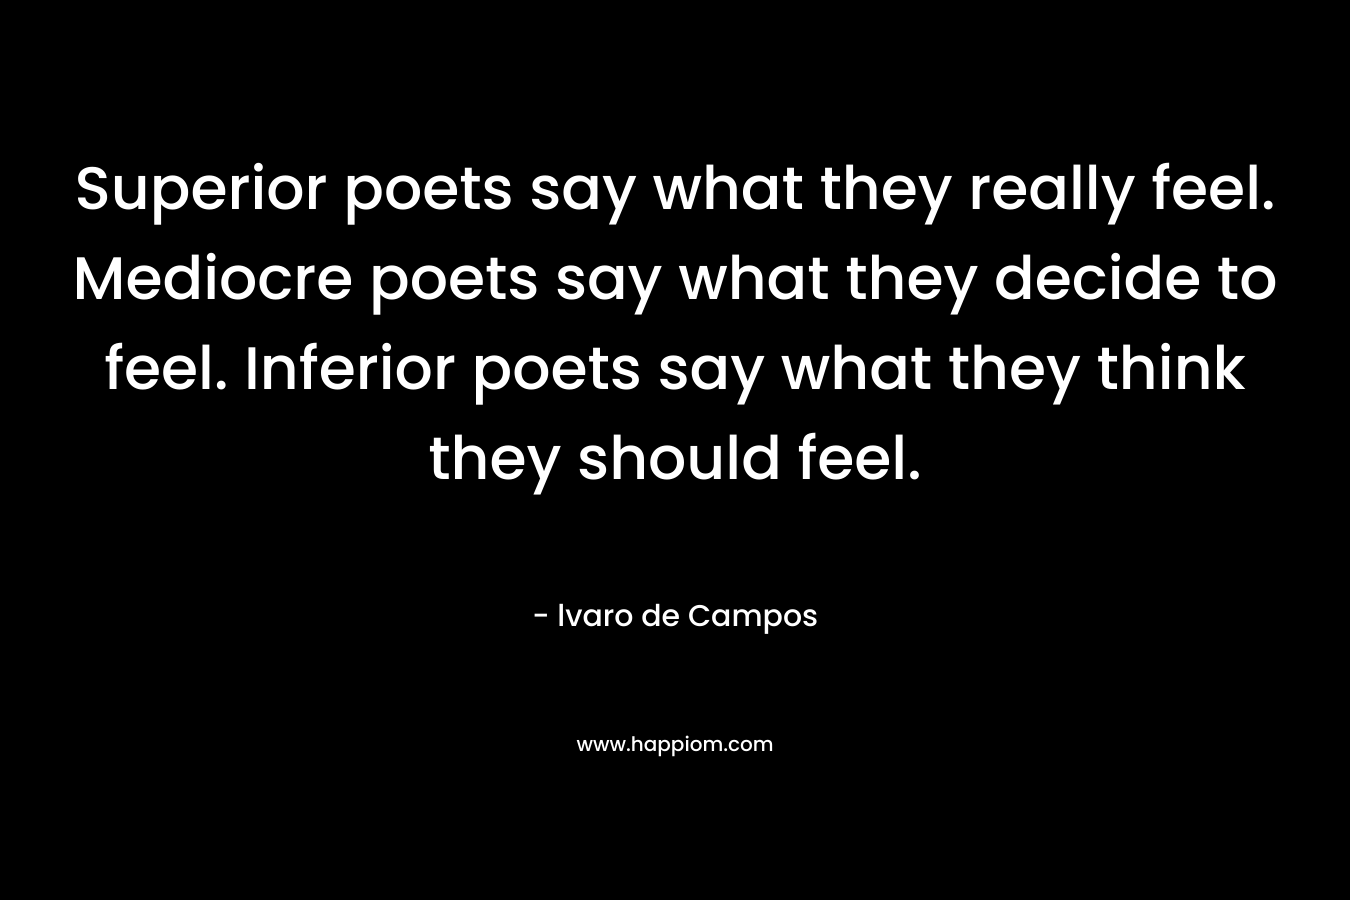 Superior poets say what they really feel. Mediocre poets say what they decide to feel. Inferior poets say what they think they should feel. – lvaro de Campos